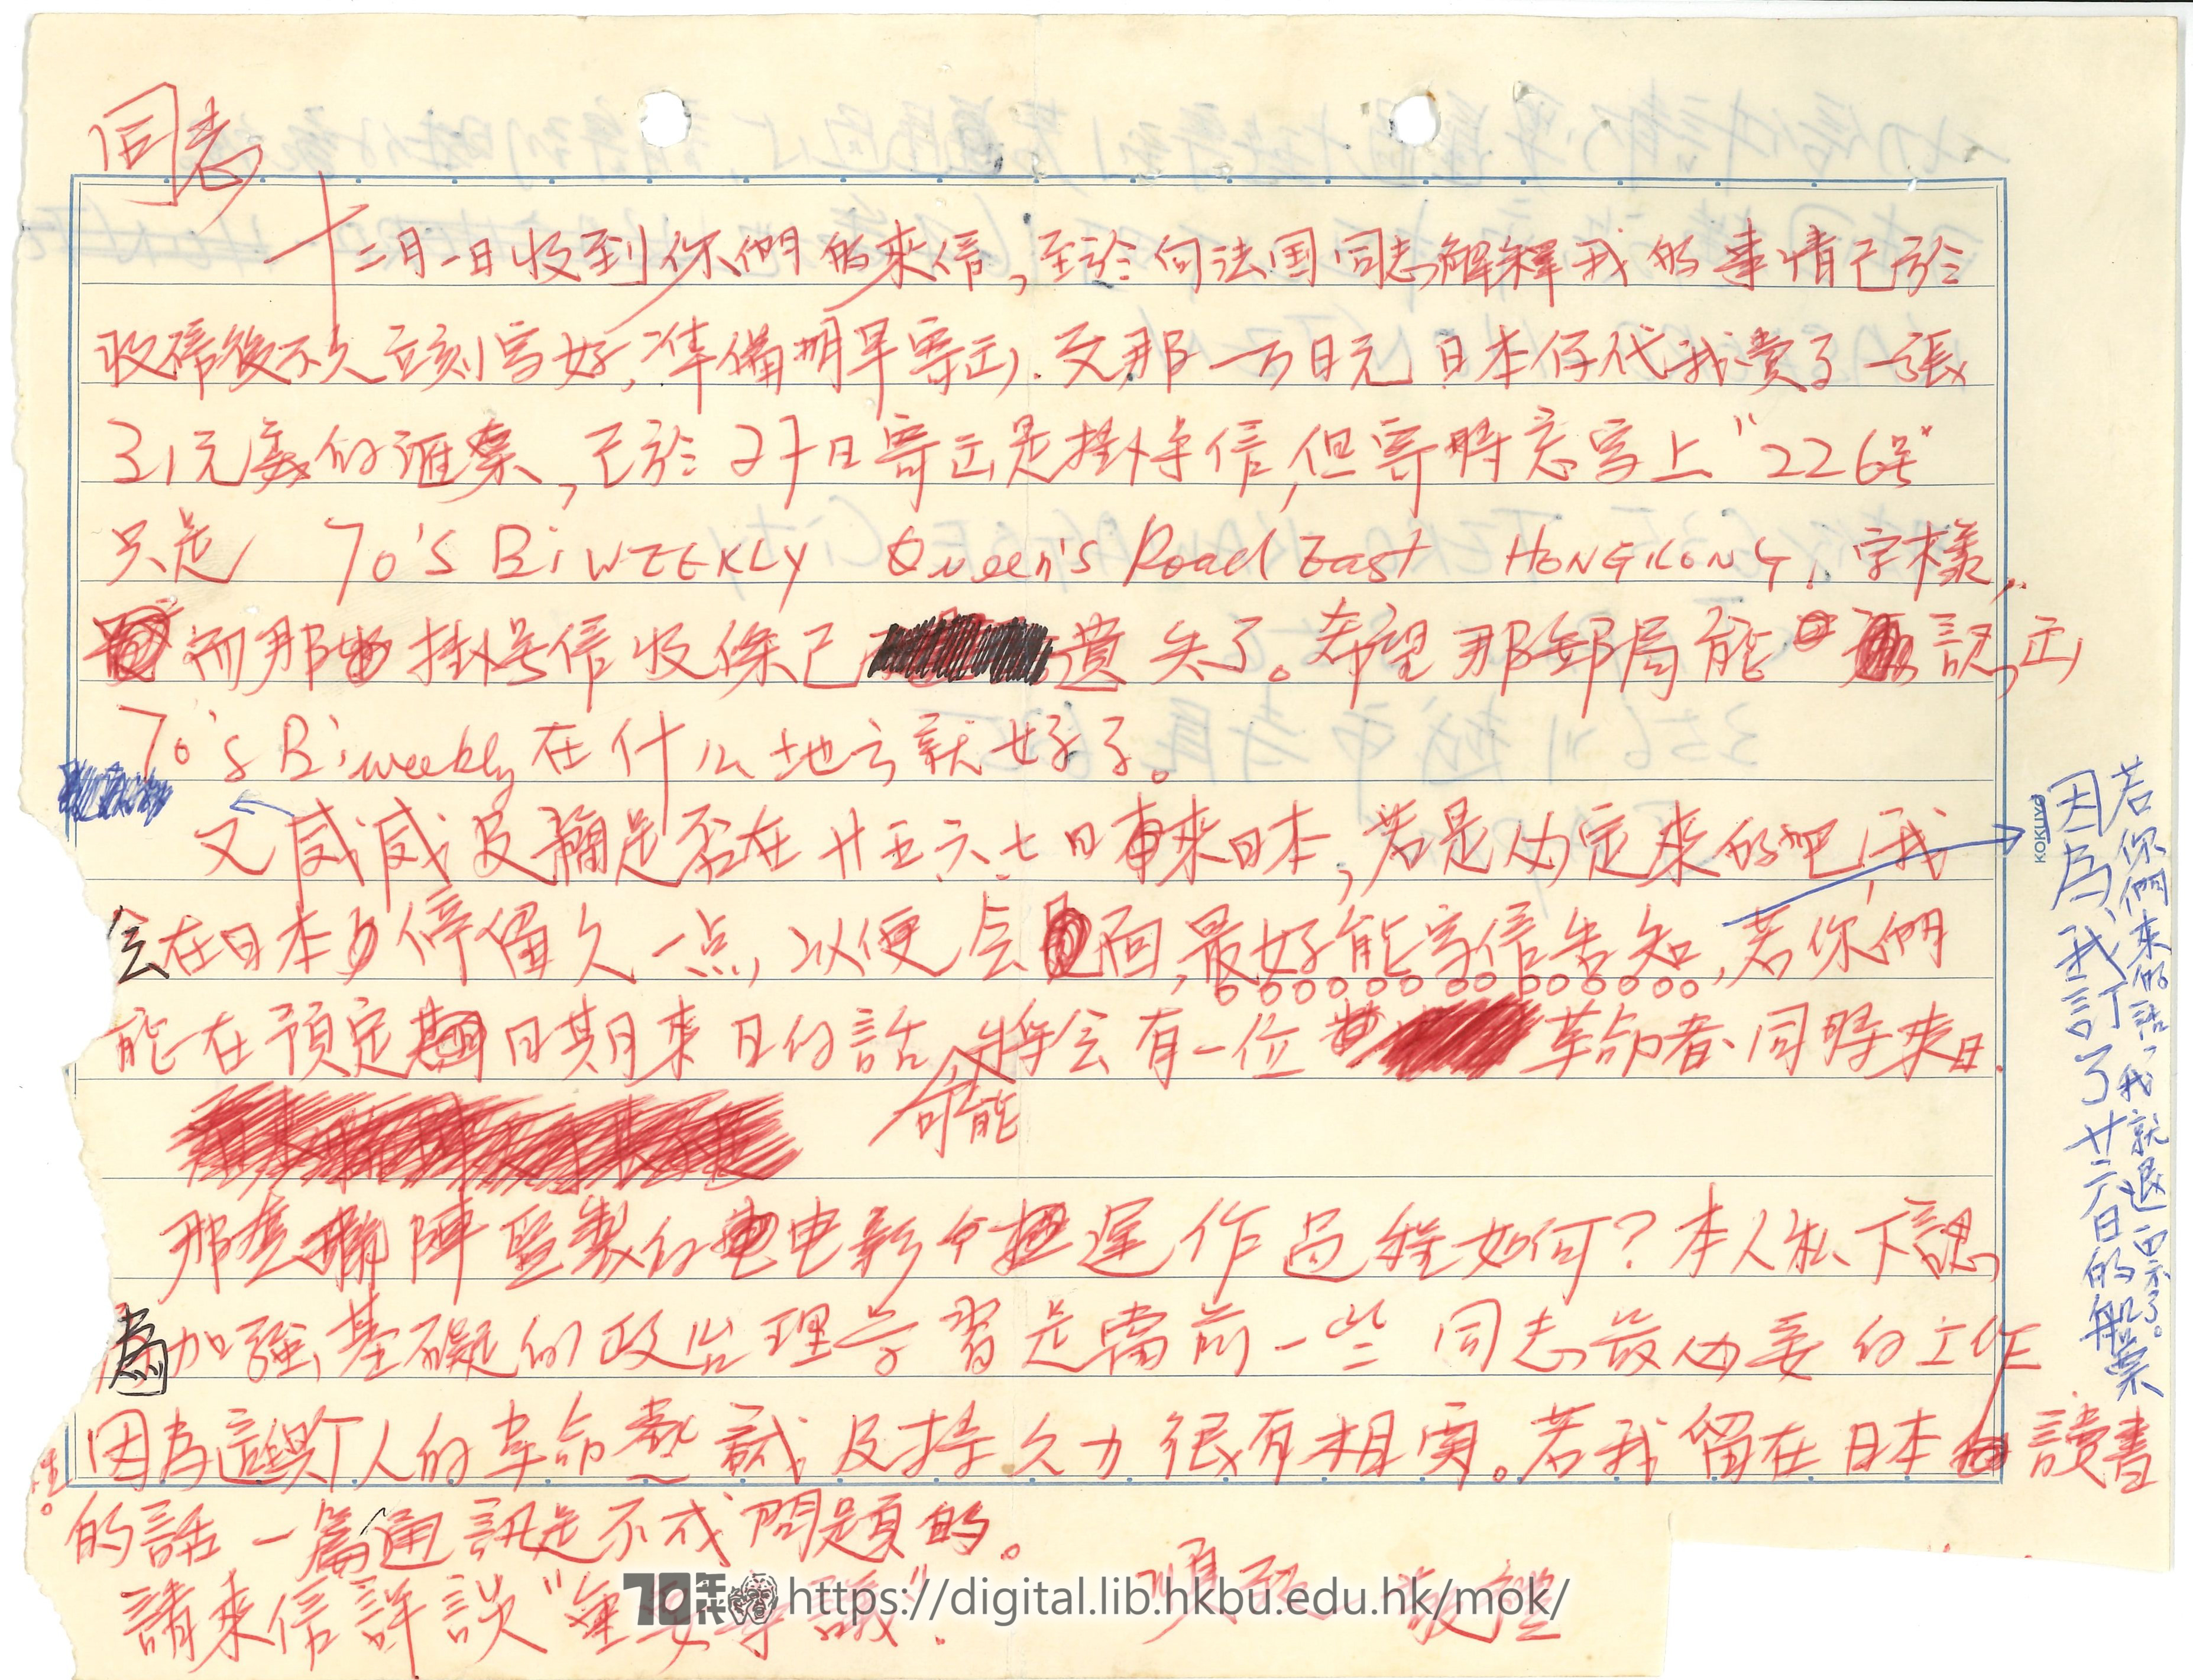   Letter from Hong Kong member of United Front in Japan  